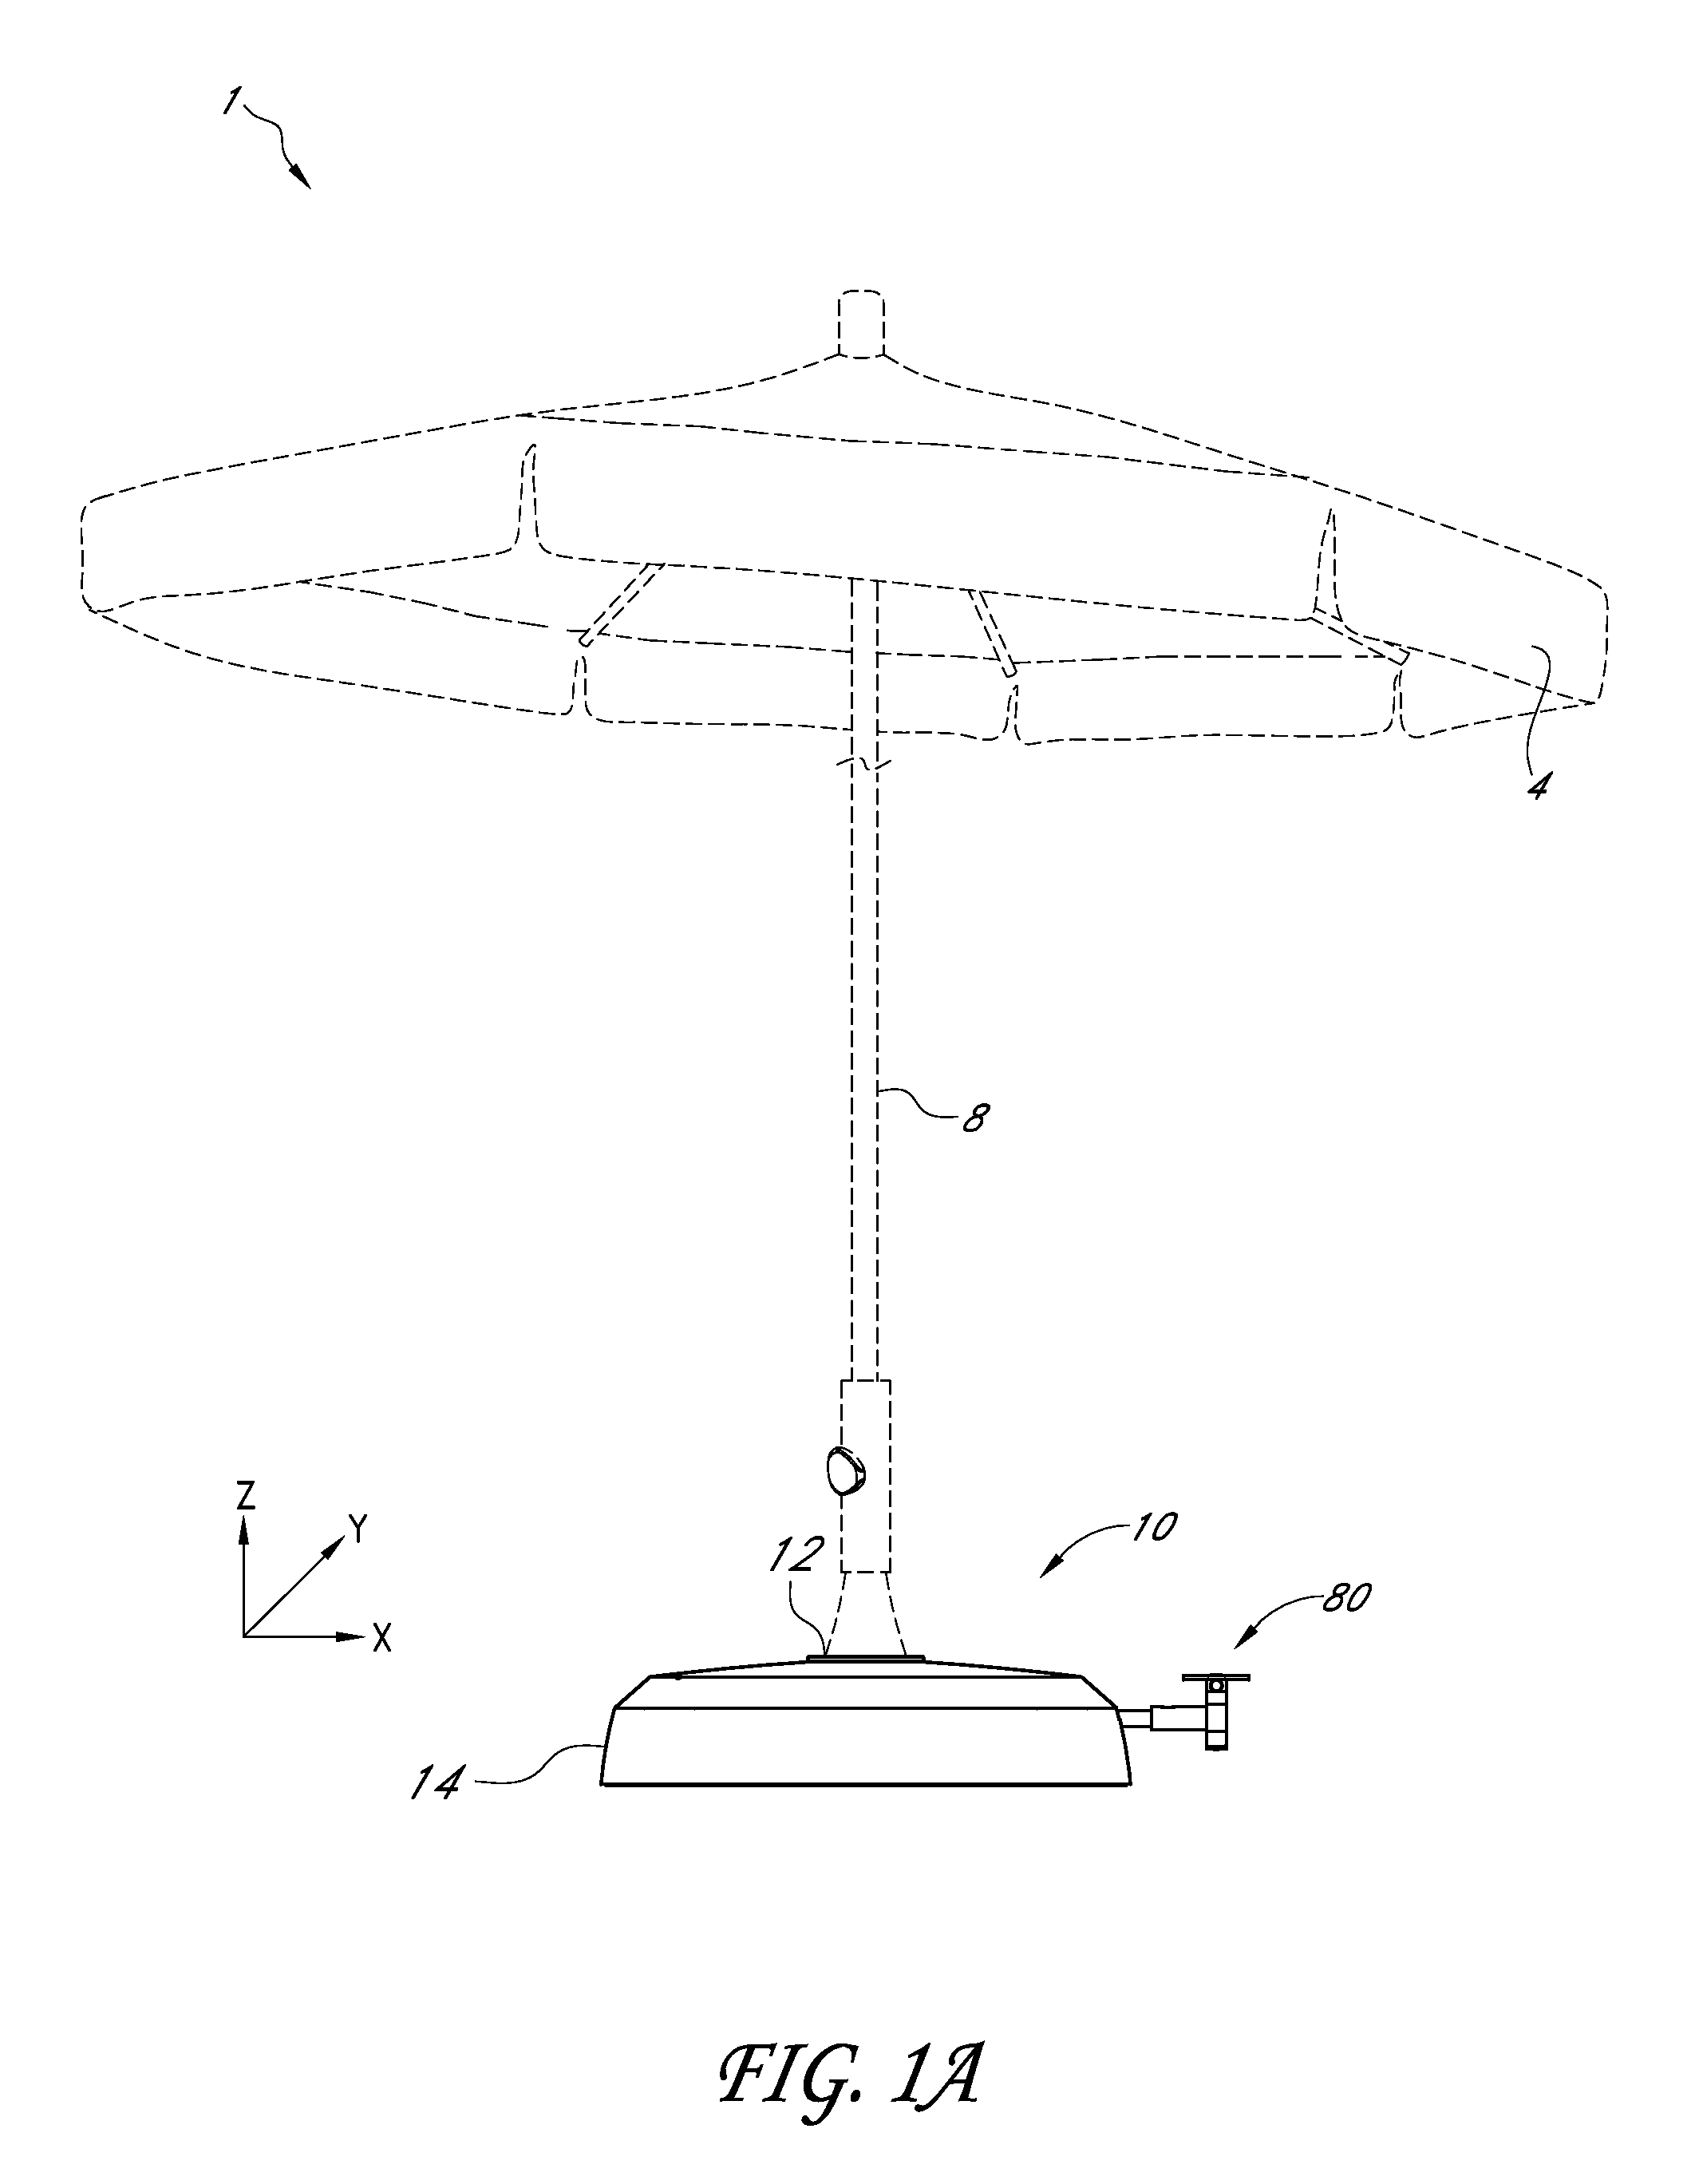 Movable base with wheels deployable by reversible driving assembly